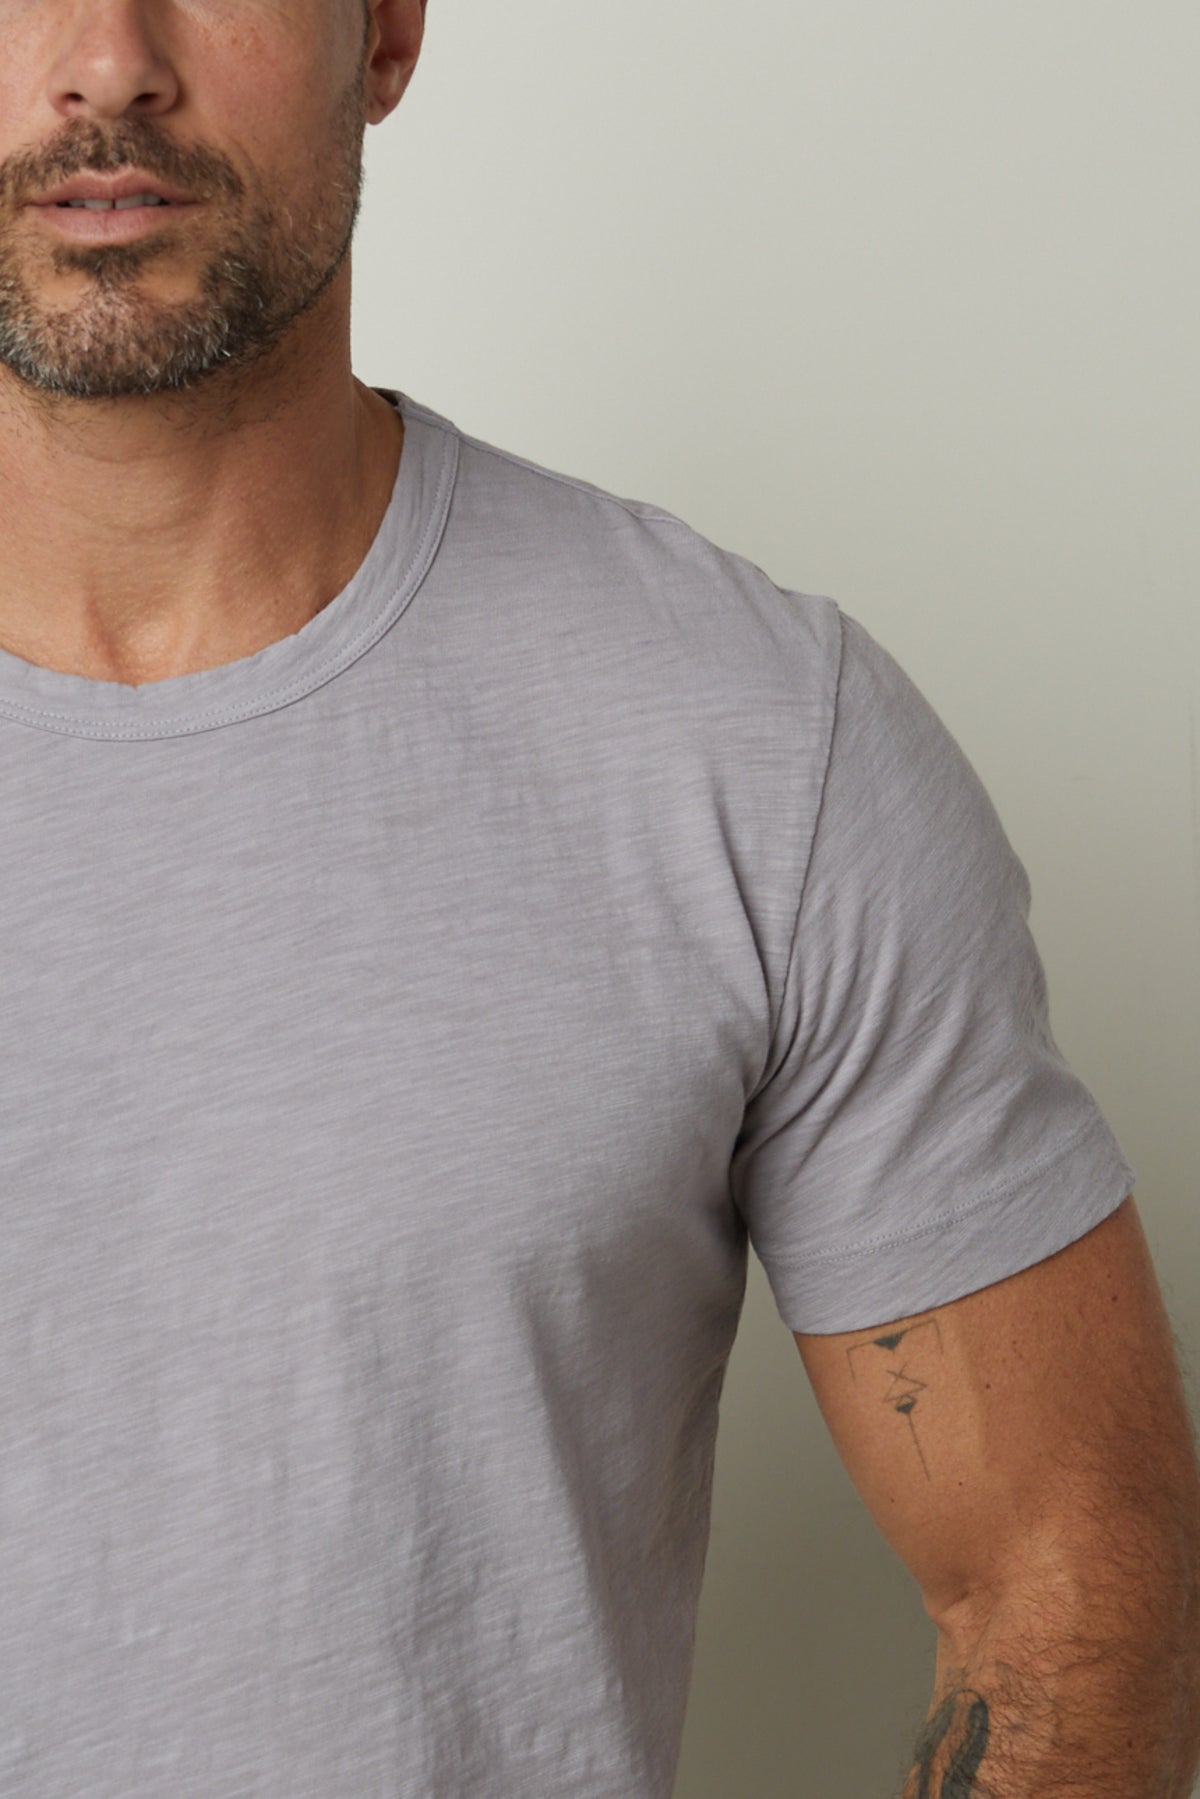   A man with a trimmed beard is wearing a light gray, cotton slub knit AMARO TEE by Velvet by Graham & Spencer, standing against a plain background. His left arm displays a tattoo. 